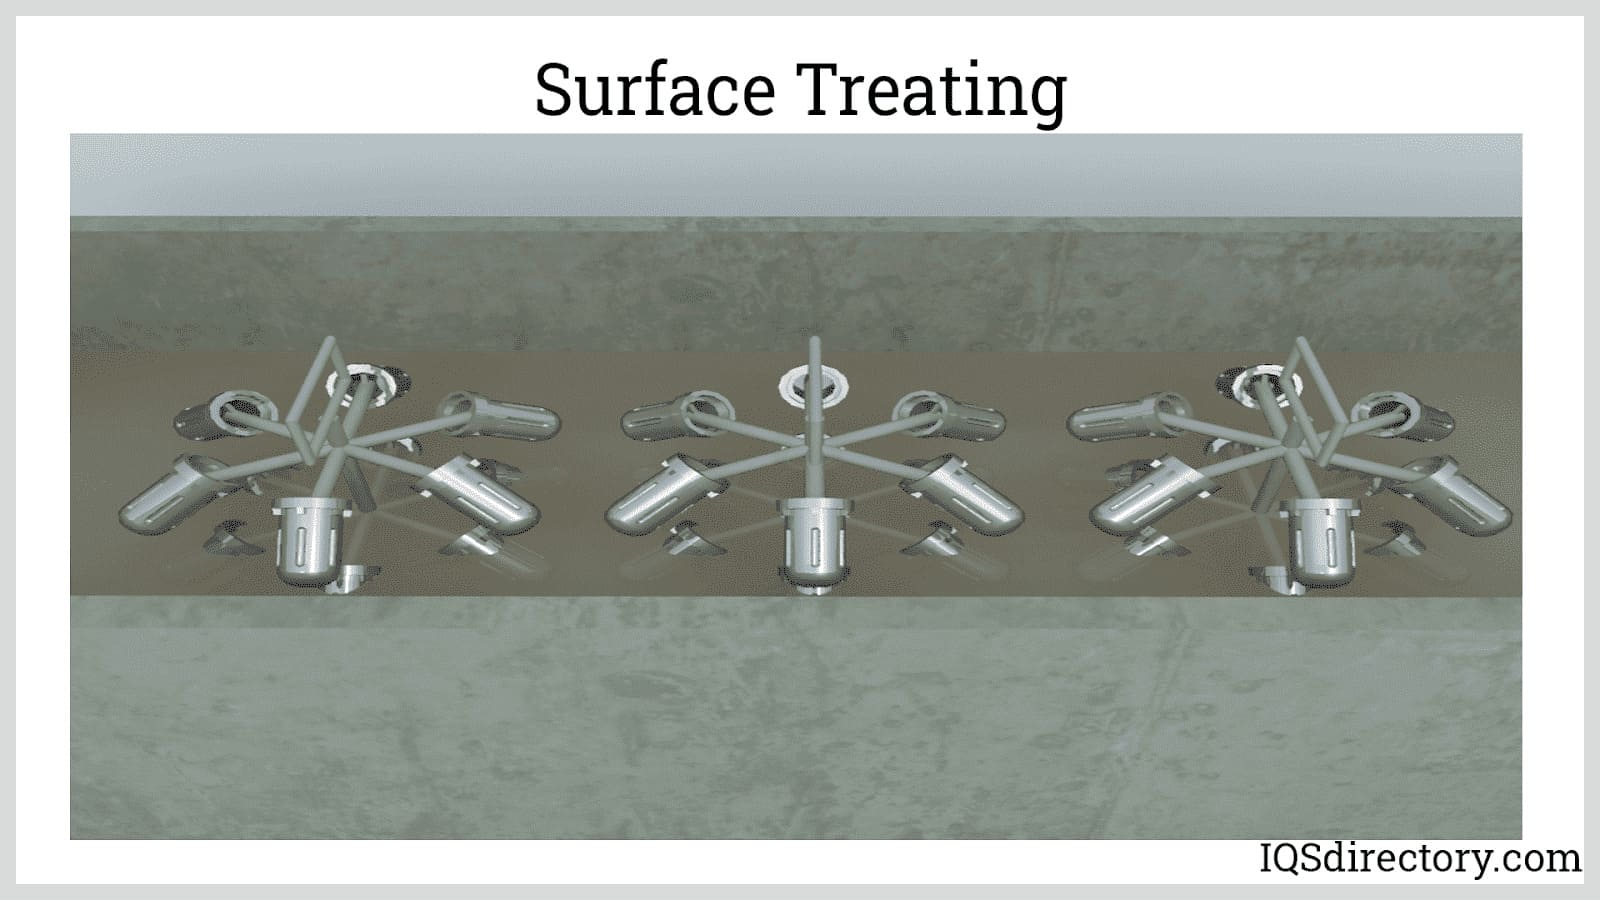 Surface Treating